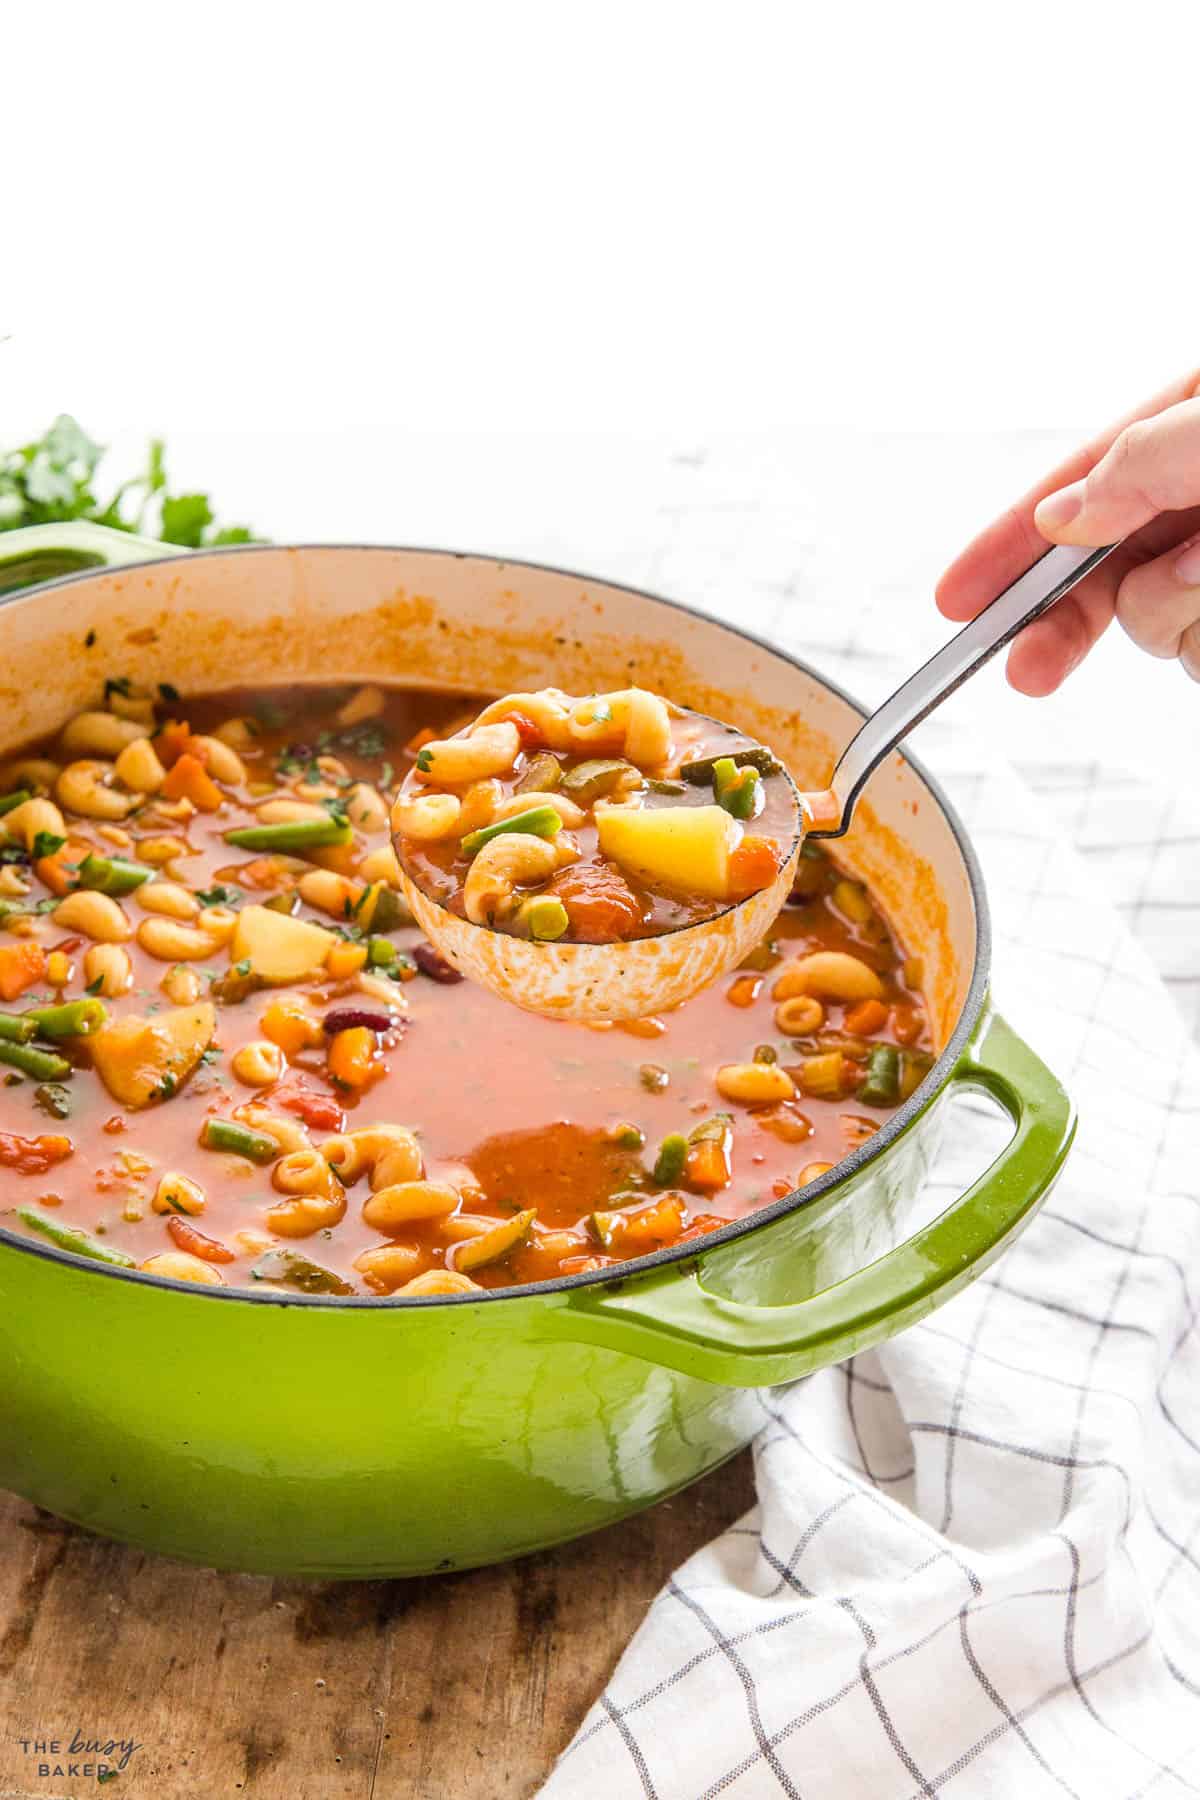 hand serving a ladle of Italian vegetable soup